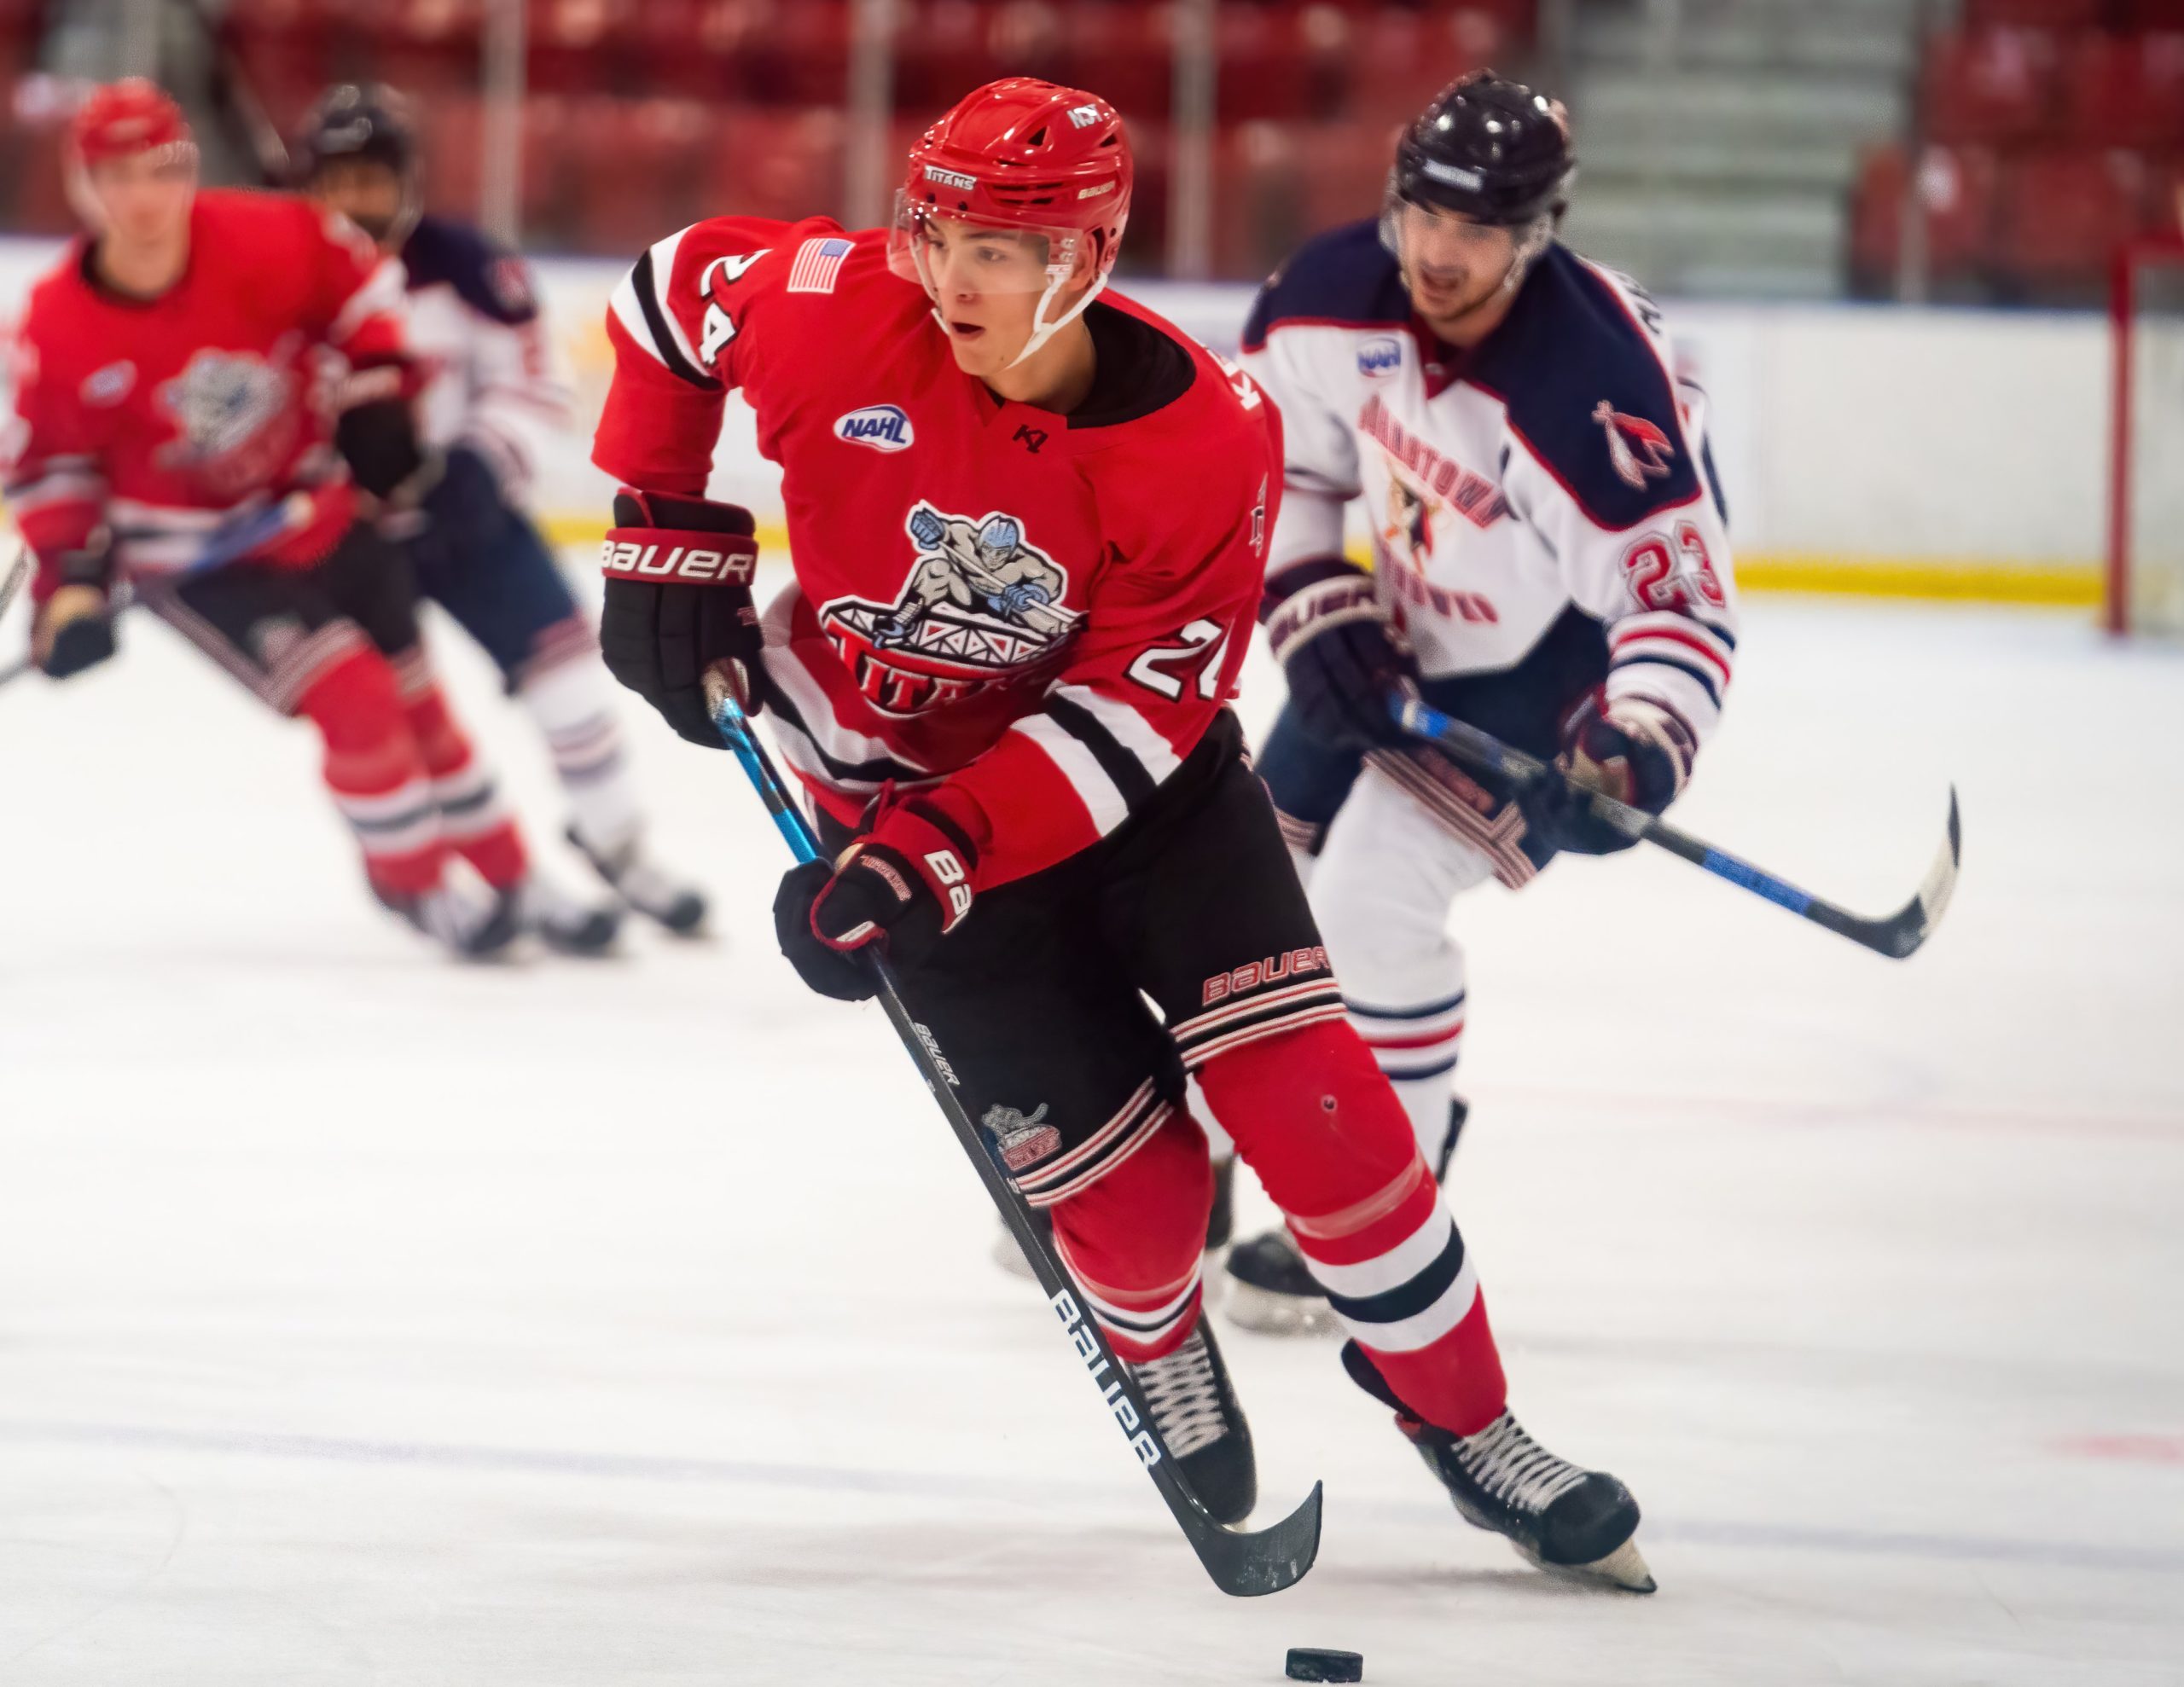 Weekend Preview: 10/8 & 10/9 - Titans host Tomahawks for two game series